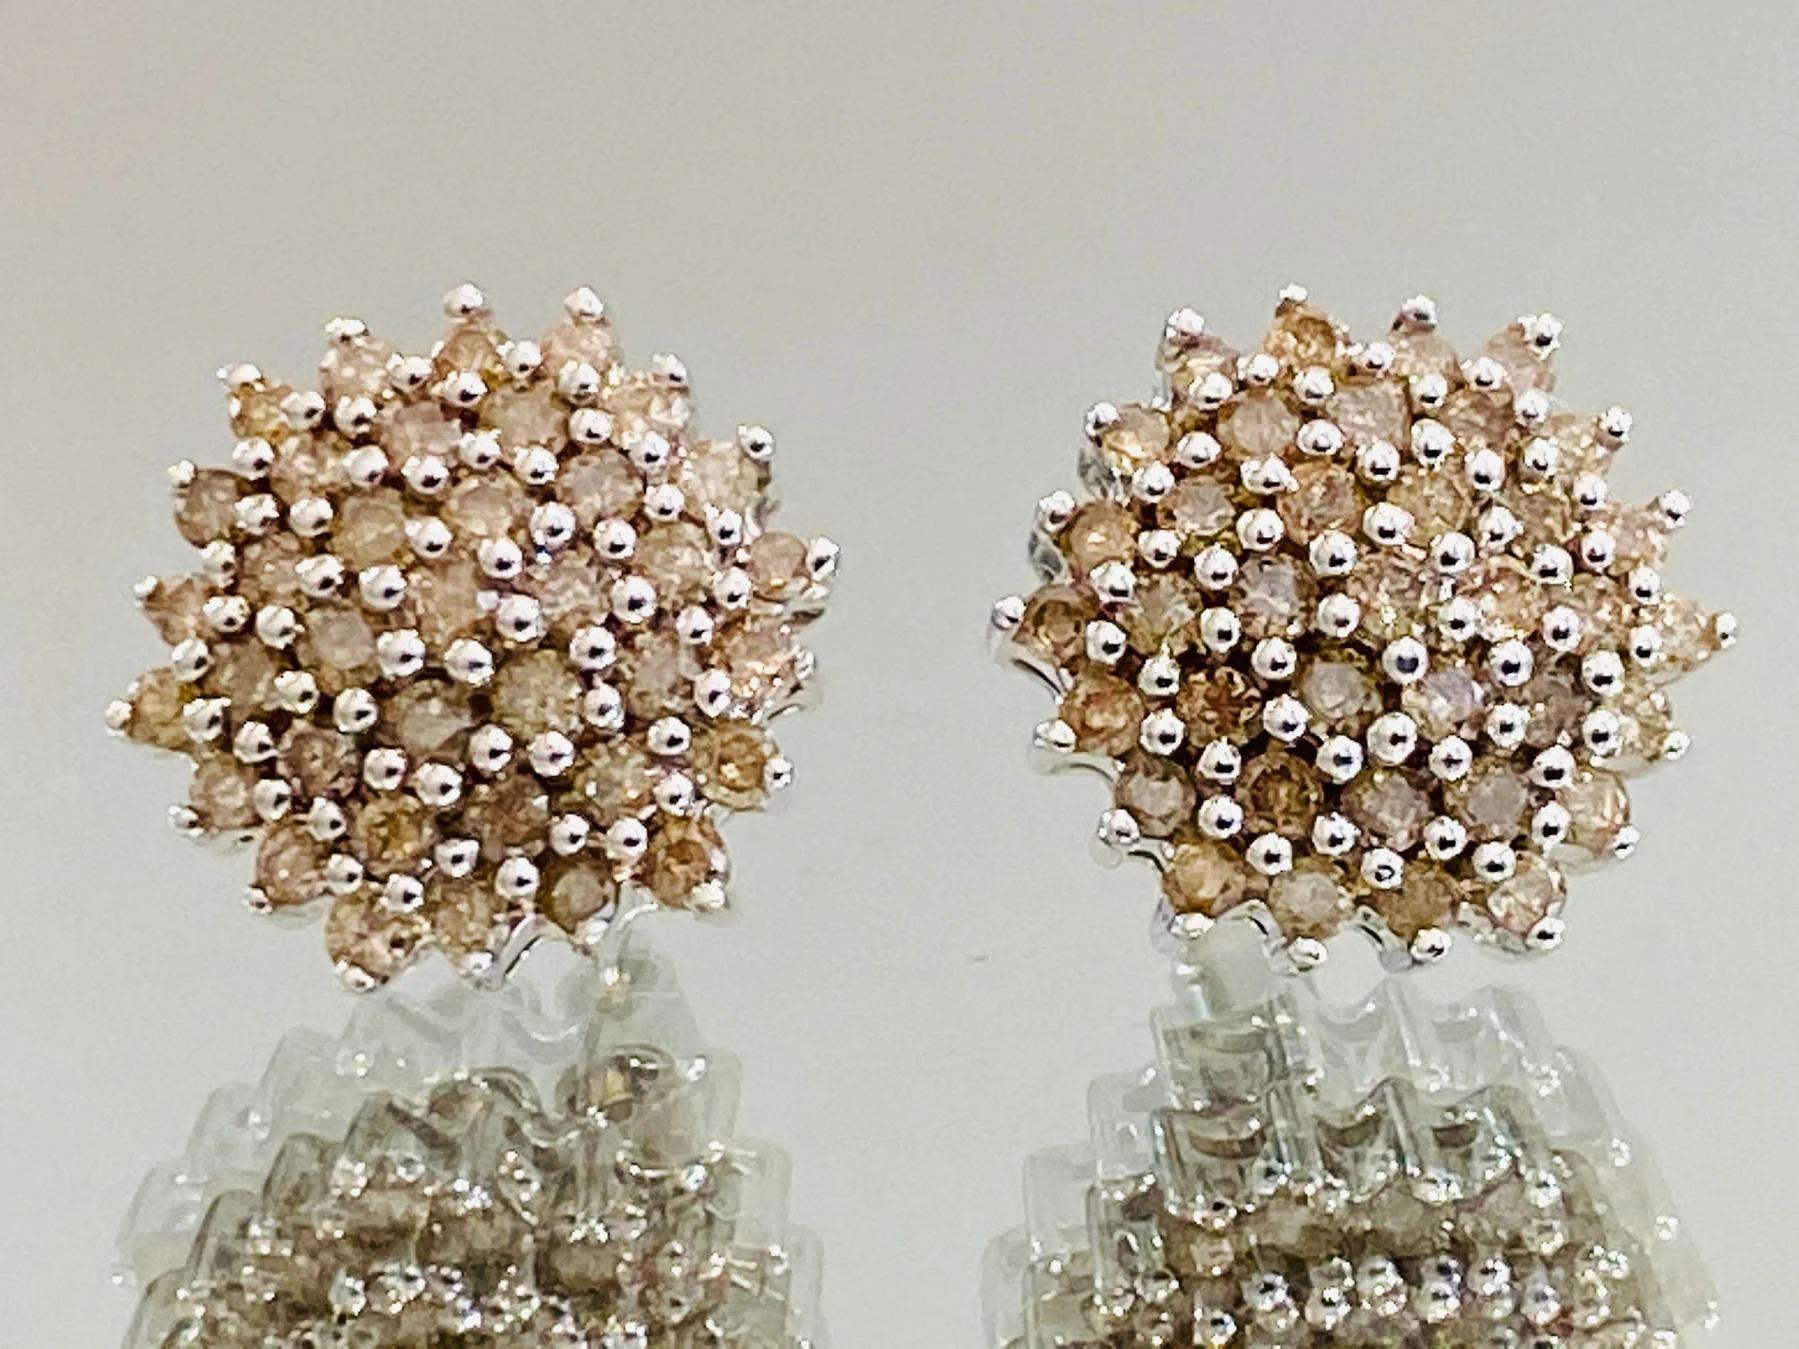 1ct Chocolate Diamond Cluster Earrings

Each earring containing a cluster of 50 chocolate diamonds each totalling .5cts. Claw setting in 9ct white gold. Lots of sparkle.

Additional information:
Size – Width 1.3cm
Composition - 9ct White Gold